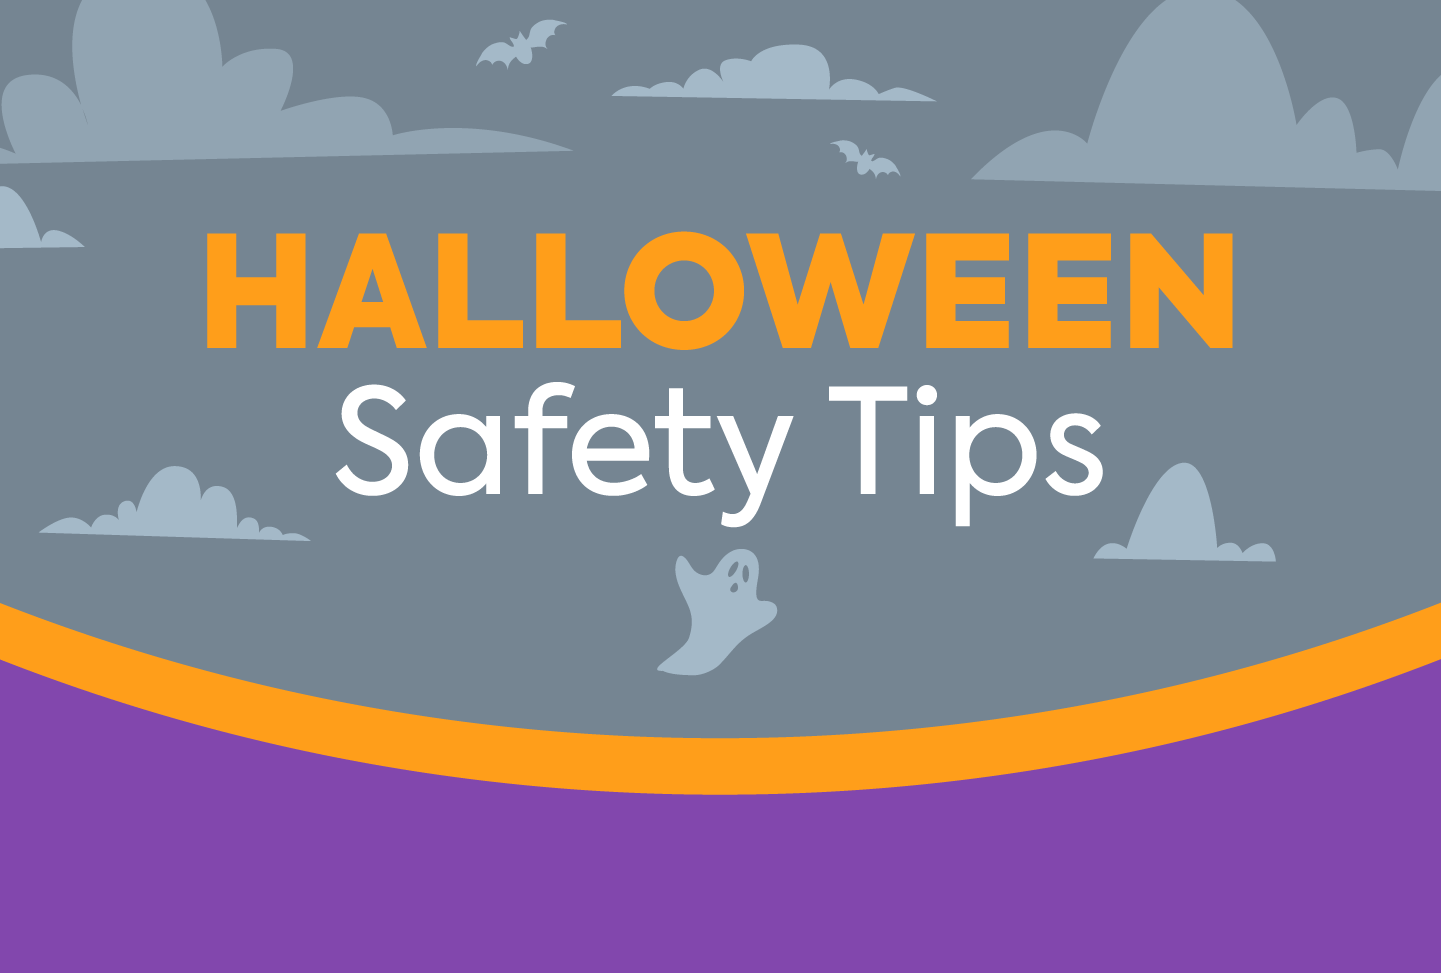 Illustration of ghosts and clouds, text reads "Halloween Safety Tips"